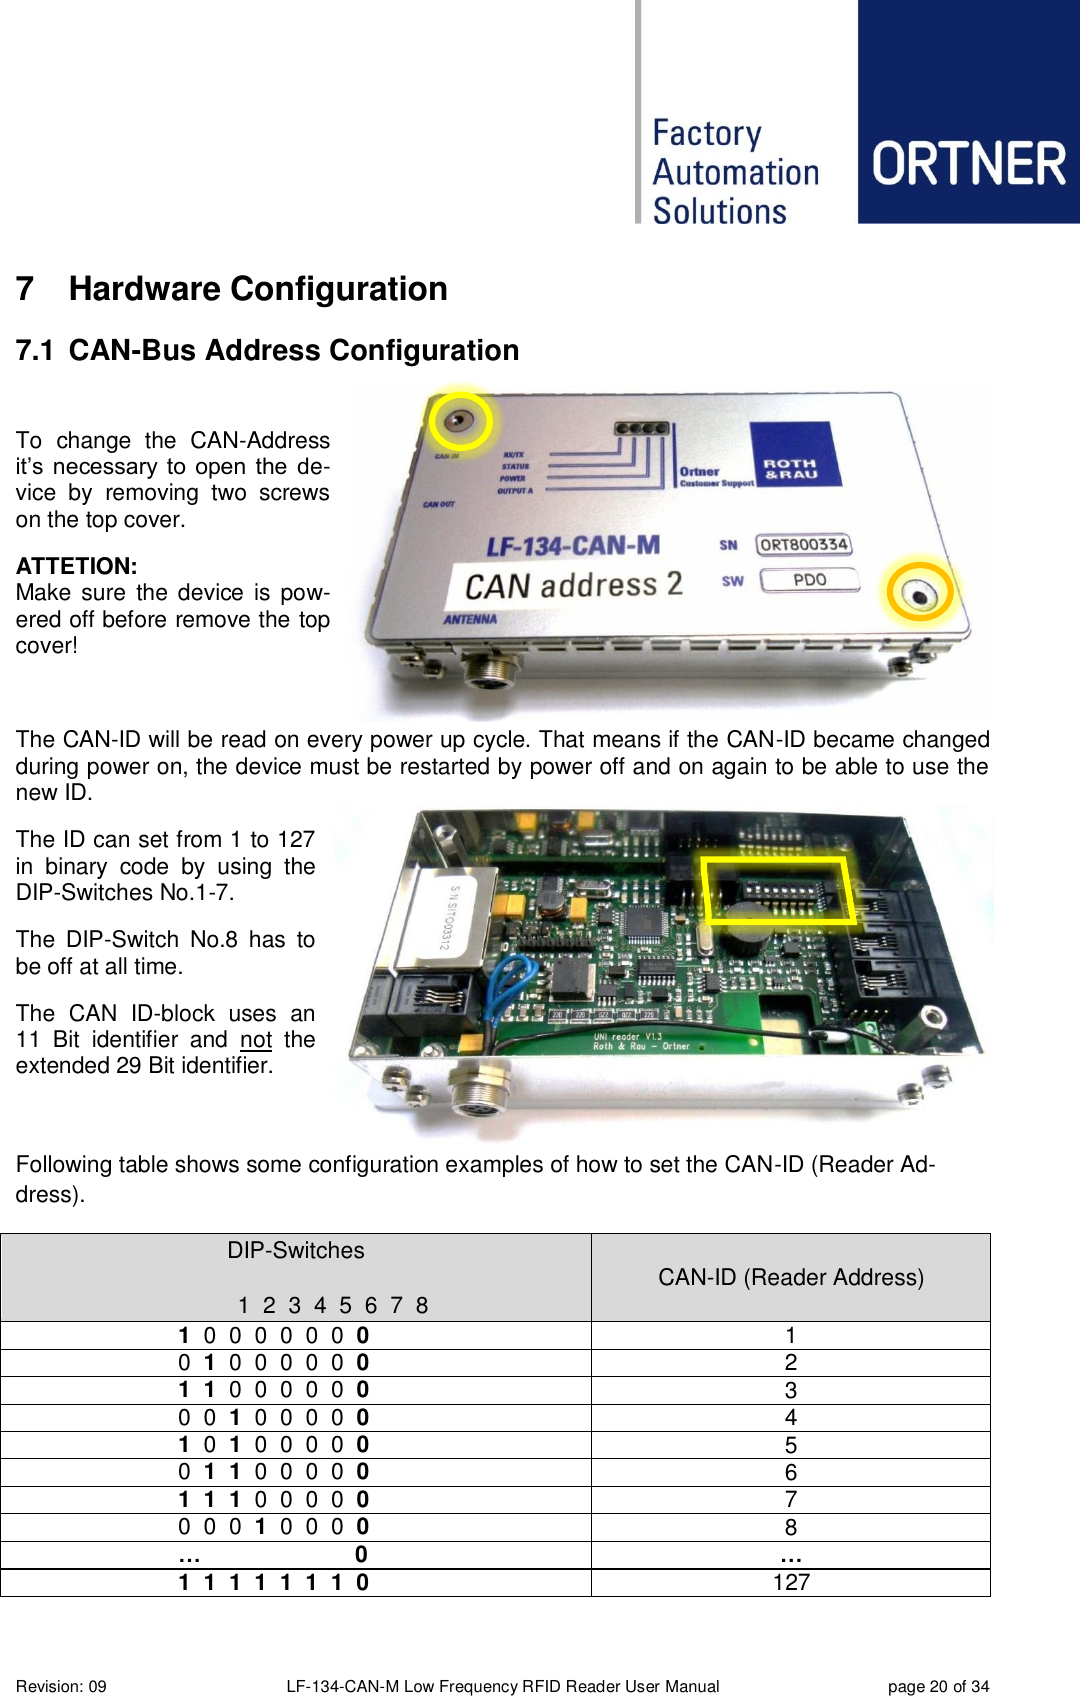  Revision: 09 LF-134-CAN-M Low Frequency RFID Reader User Manual  page 20 of 34 7  Hardware Configuration 7.1  CAN-Bus Address Configuration  To  change  the  CAN-Address it’s  necessary  to  open the  de-vice  by  removing  two  screws on the top cover. ATTETION: Make  sure  the device  is pow-ered off before remove the top cover!  The CAN-ID will be read on every power up cycle. That means if the CAN-ID became changed during power on, the device must be restarted by power off and on again to be able to use the new ID. The ID can set from 1 to 127 in  binary  code  by  using  the DIP-Switches No.1-7. The  DIP-Switch  No.8  has  to be off at all time. The  CAN  ID-block  uses  an 11  Bit  identifier  and  not  the extended 29 Bit identifier.  Following table shows some configuration examples of how to set the CAN-ID (Reader Ad-dress).  DIP-Switches   1  2  3  4  5  6  7  8 CAN-ID (Reader Address)  1  0  0  0  0  0  0  0 1   0  1  0  0  0  0  0  0 2  1  1  0  0  0  0  0  0 3   0  0  1  0  0  0  0  0 4  1  0  1  0  0  0  0  0 5   0  1  1  0  0  0  0  0 6  1  1  1  0  0  0  0  0 7   0  0  0  1  0  0  0  0 8  …  0 …  1  1  1  1  1  1  1  0 127 